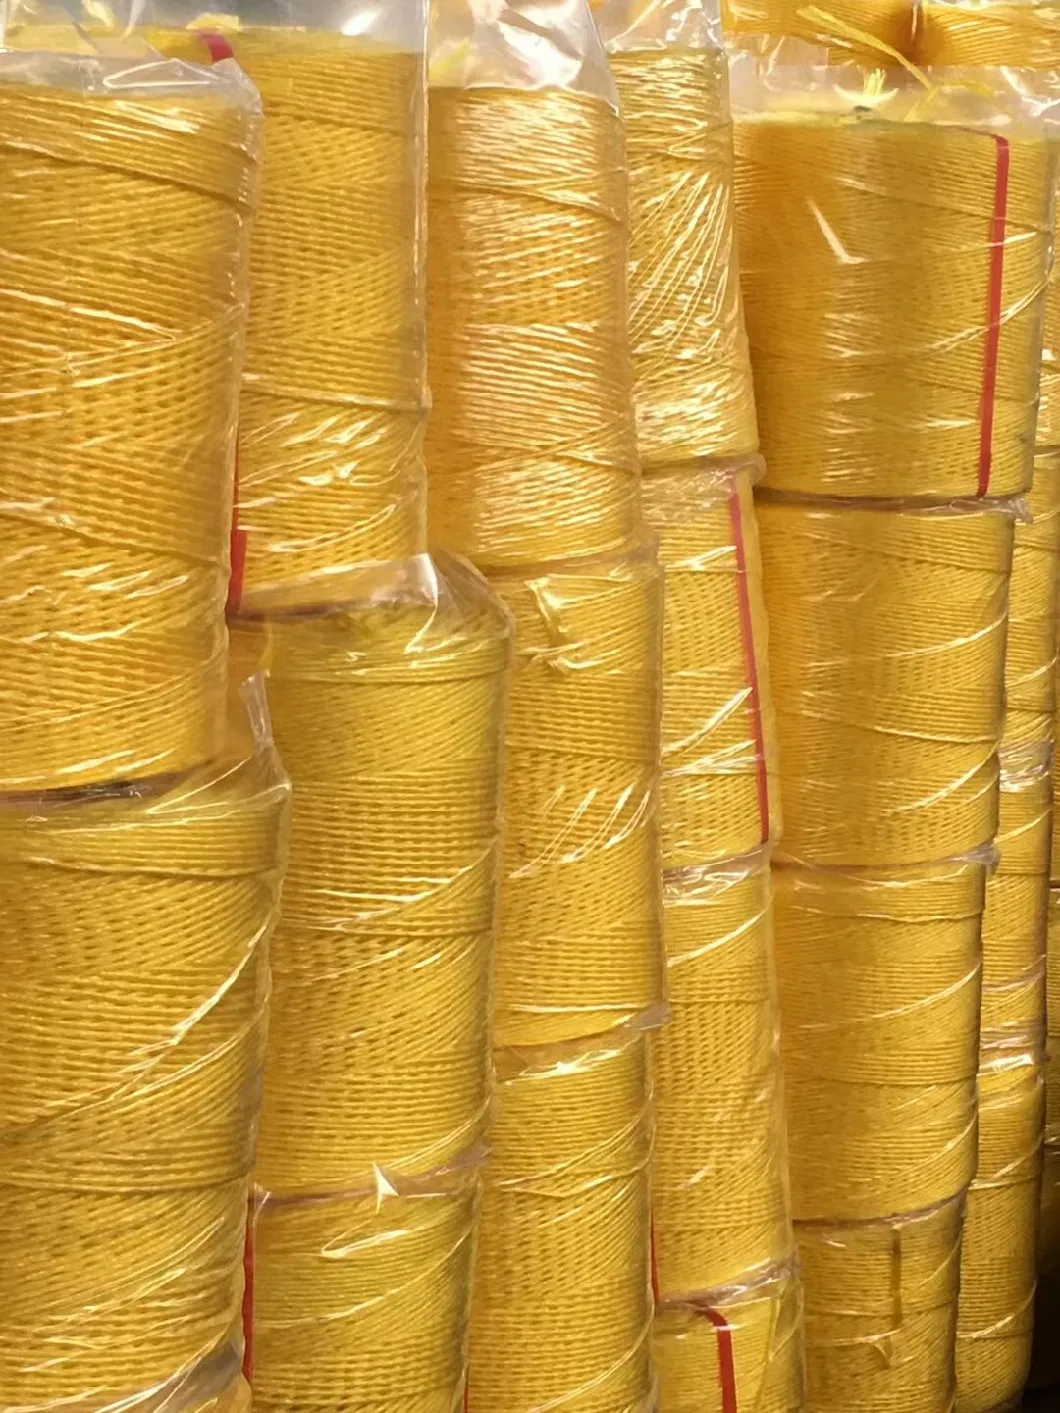 PP Baler Twine for Baling in Agriculture with High Strength